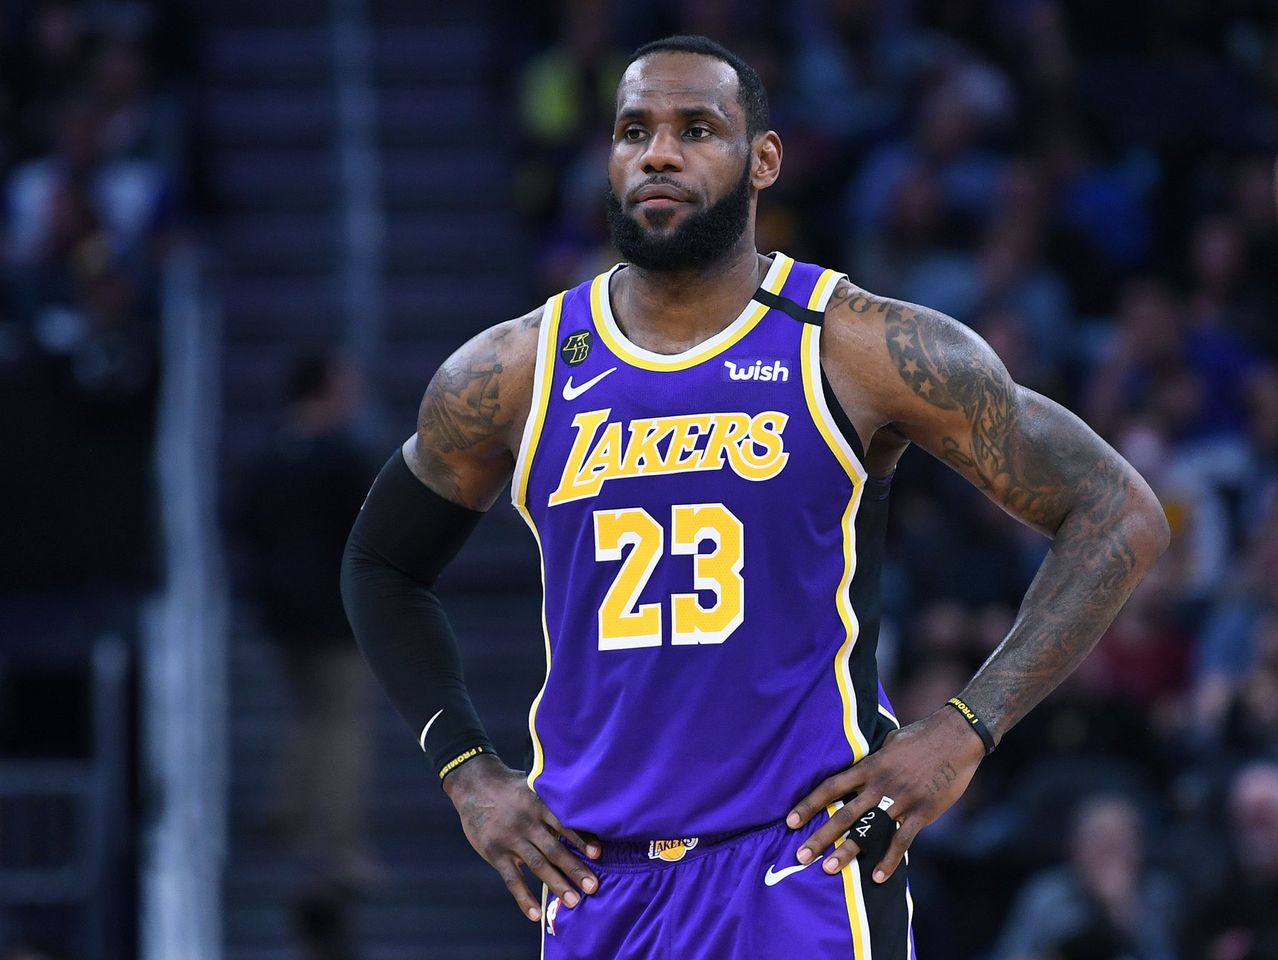 LeBron James #23 of the Los Angeles Lakers looks on against the Golden State Warriors during an NBA basketball game on February 08, 2020. | Photo: Getty Images